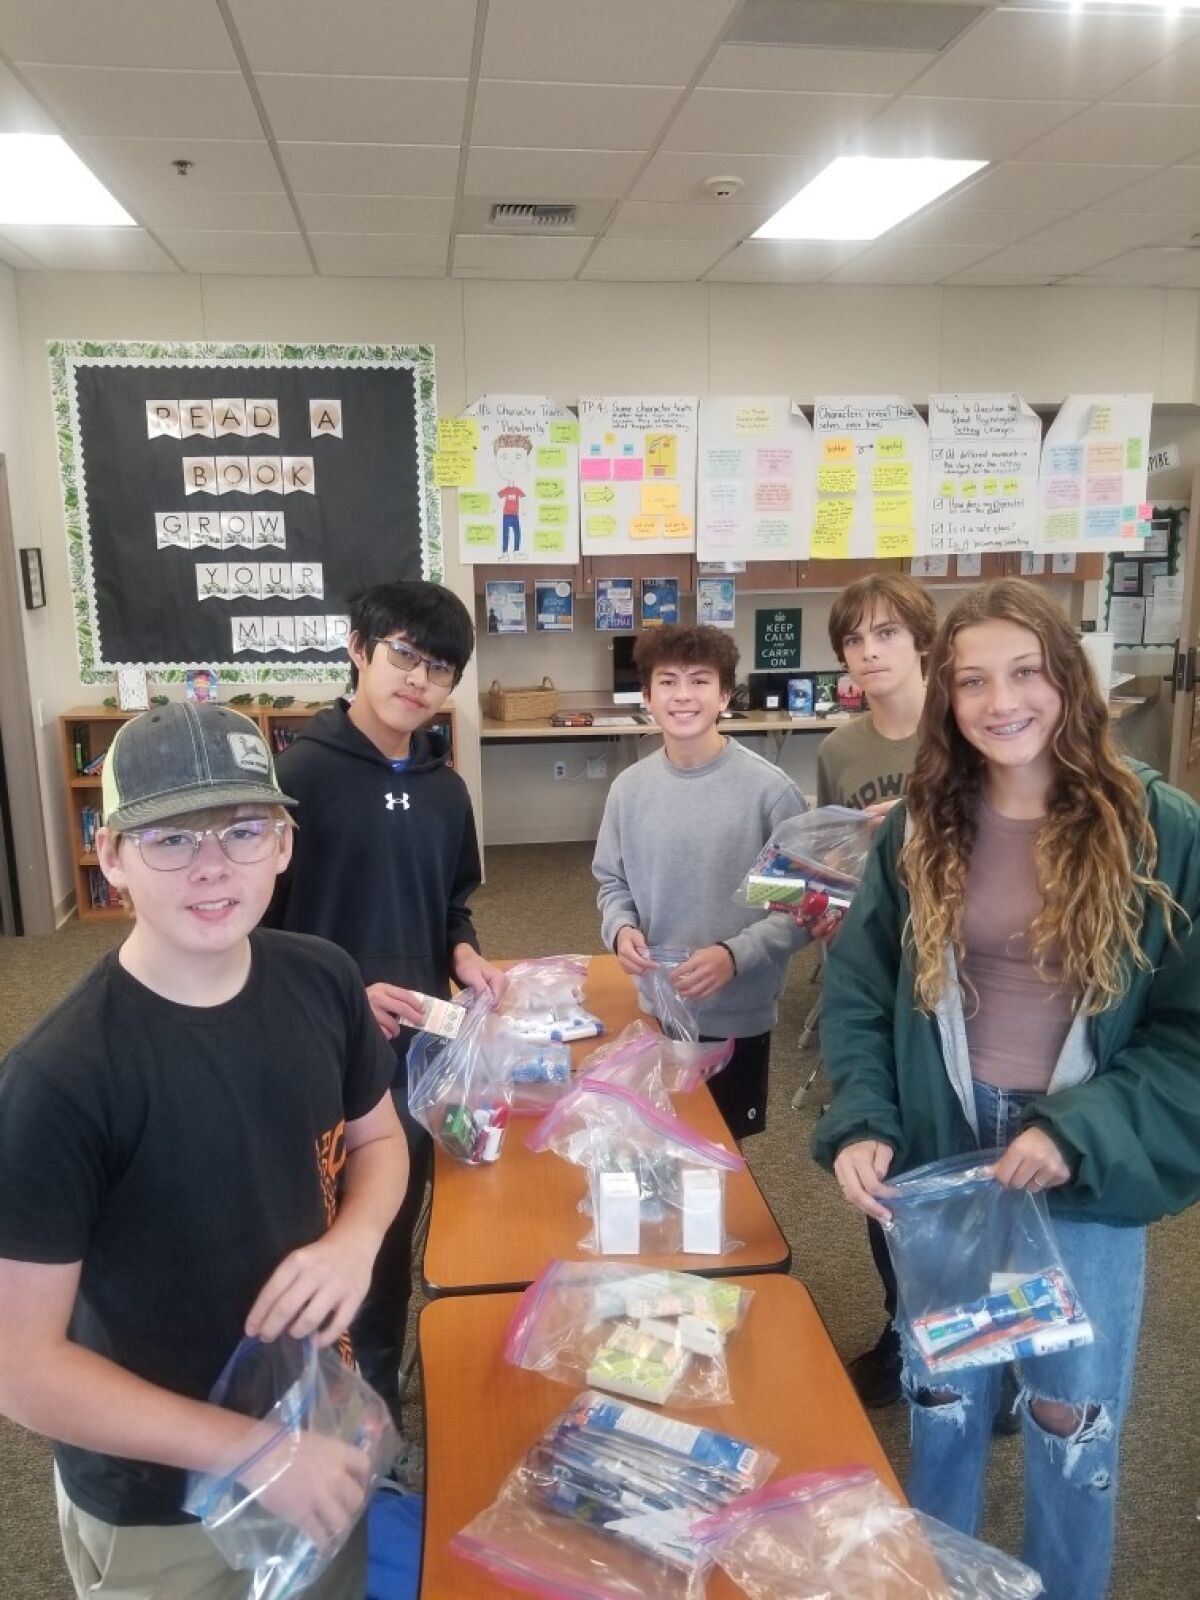 Interactors assembling hygiene bags for San Diego Youth Services.